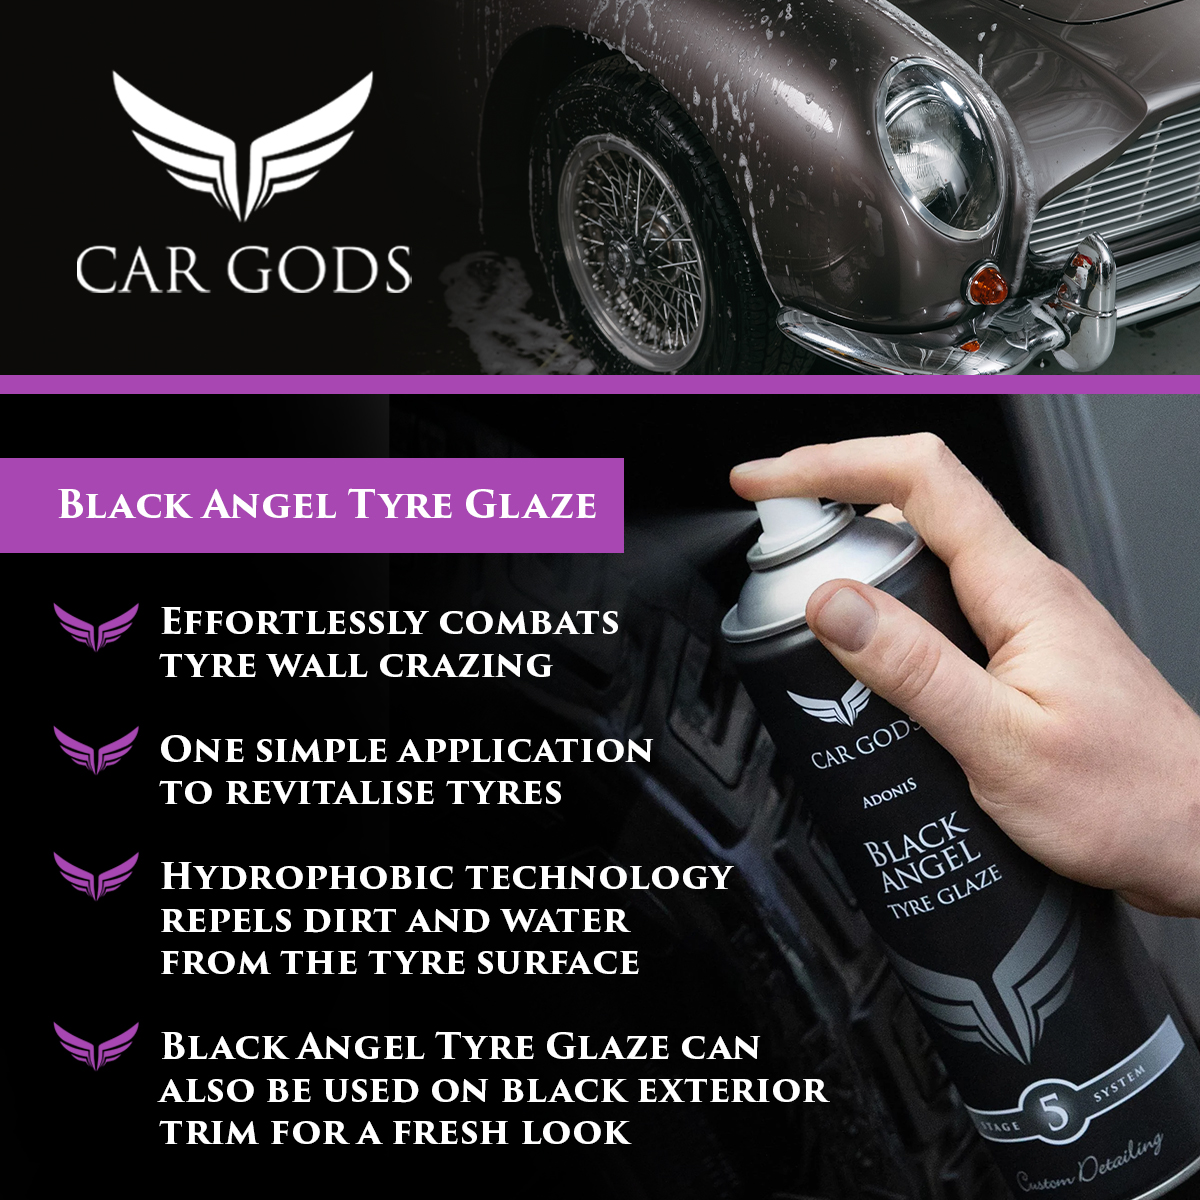 Car Gods Black Angel Tyre Glaze. Effortlessly combat tyre wall crazing in one simple application. Hydrophobic technology repels dirt and water from the tyre surface.